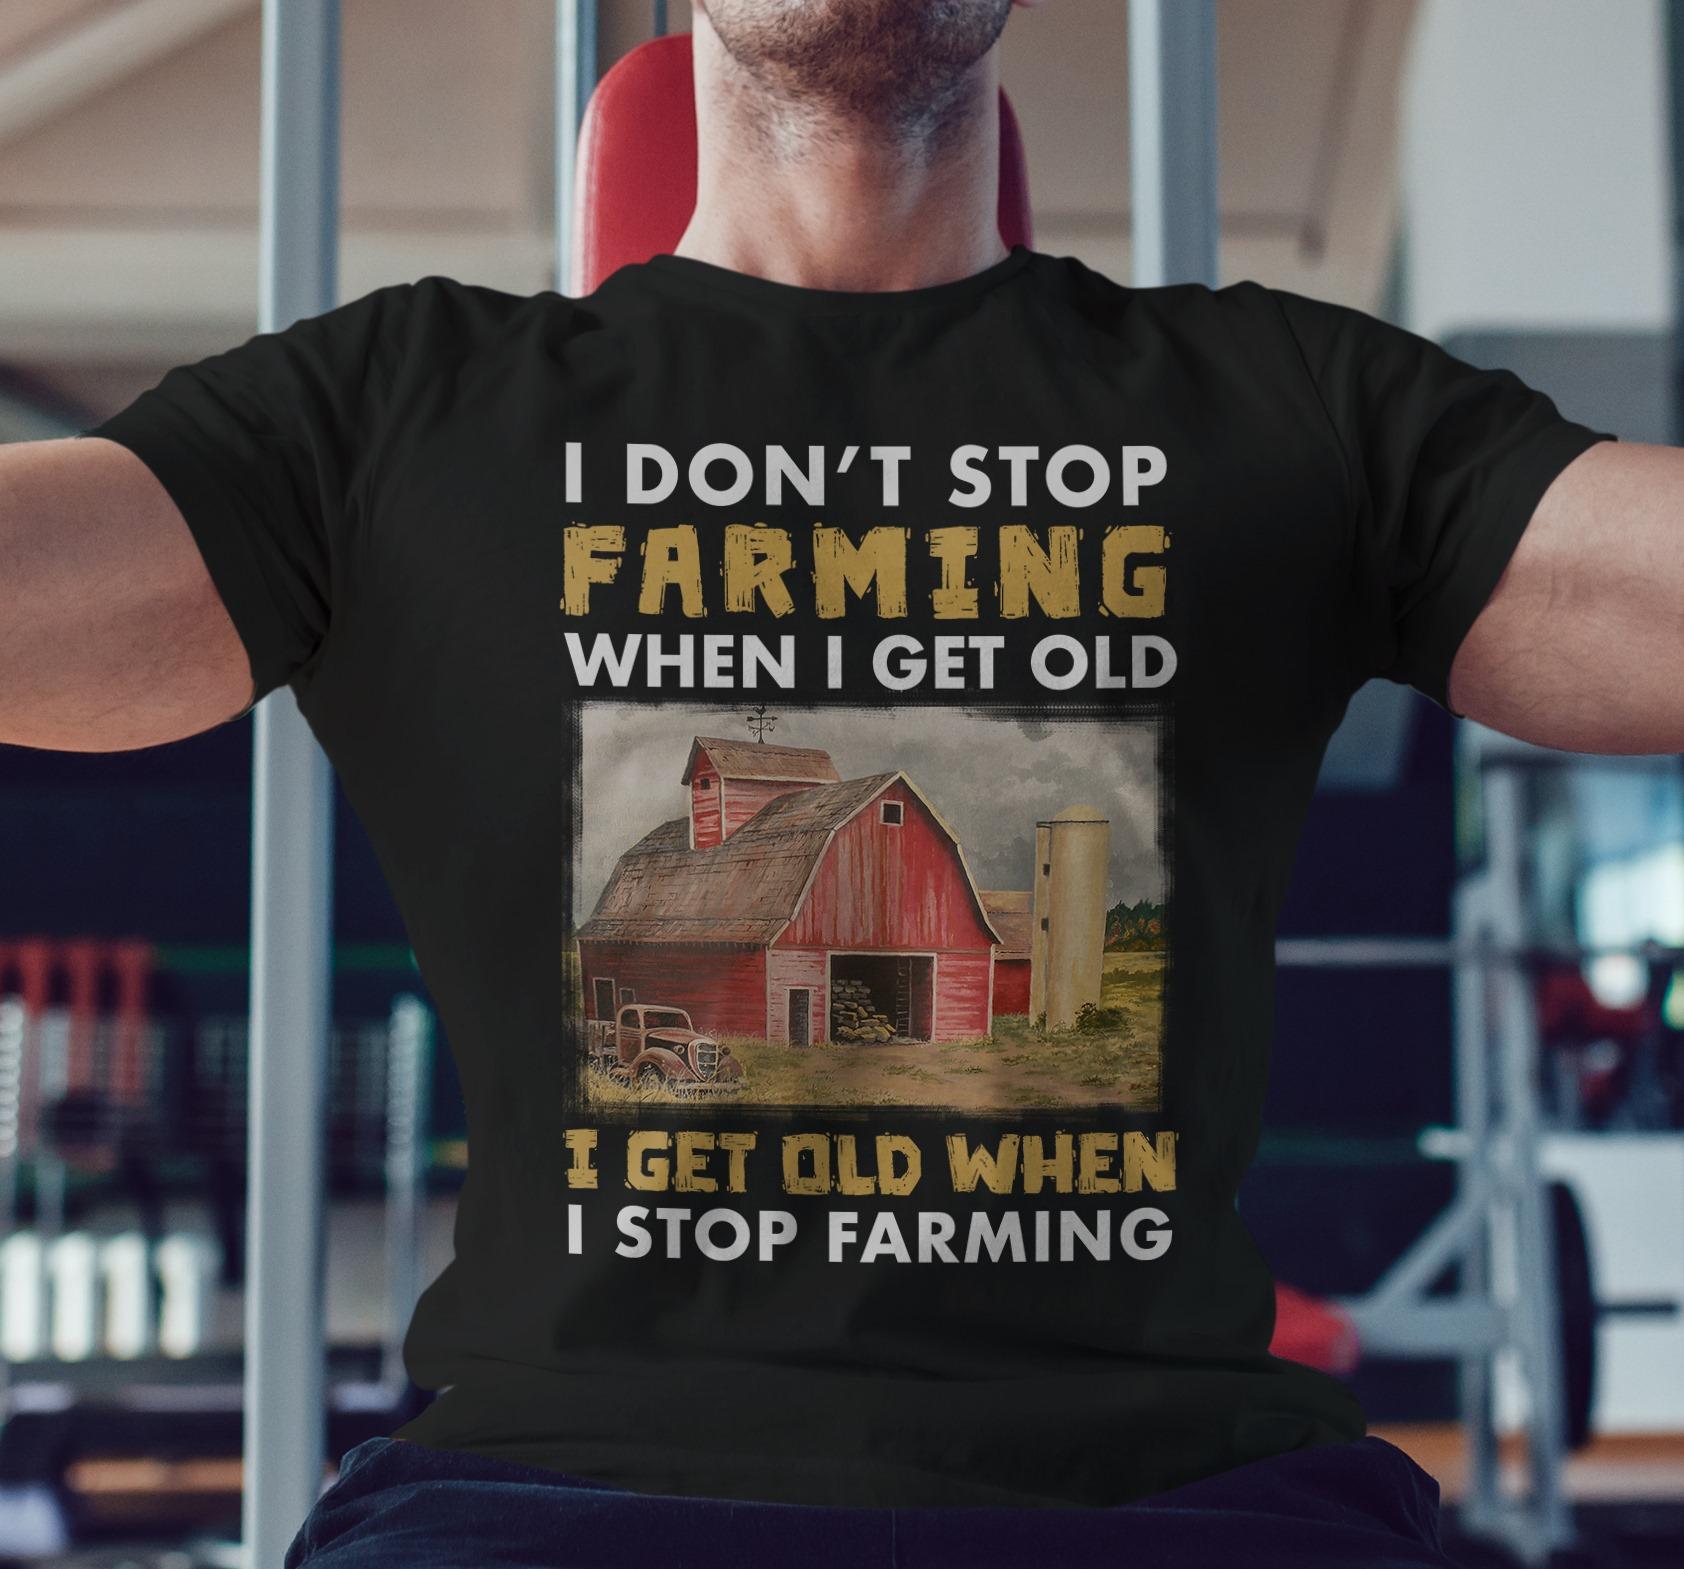 I don't stop farming when I get old, I get old when I stop farming - Peaceful farm graphic T-shirt, farmer for life